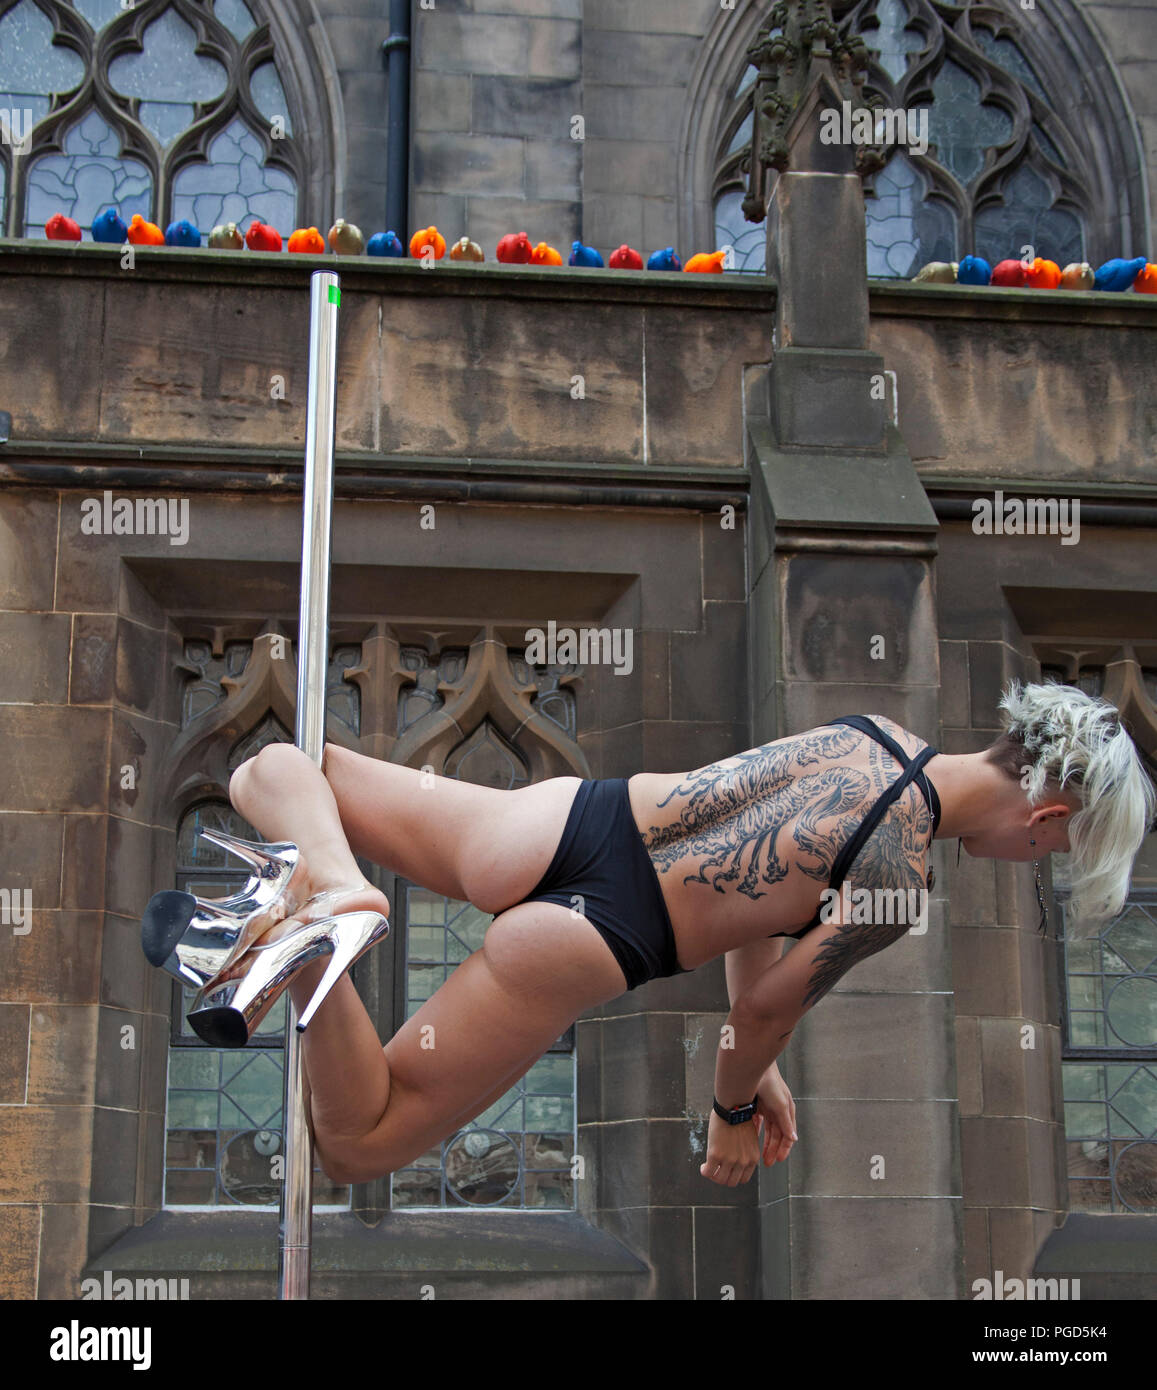 Edinburgh, Scotland, UK. 25 August 2018. Edinburgh Fringe Royal Mile, on the final Saturday there was a lot of hanging around on the High Street not for acts but by acts displaying their agility on Poles, skilled female performer 'Professional Wild Thing' Bex Crow on her flying pole busked in the alcoves Stock Photo